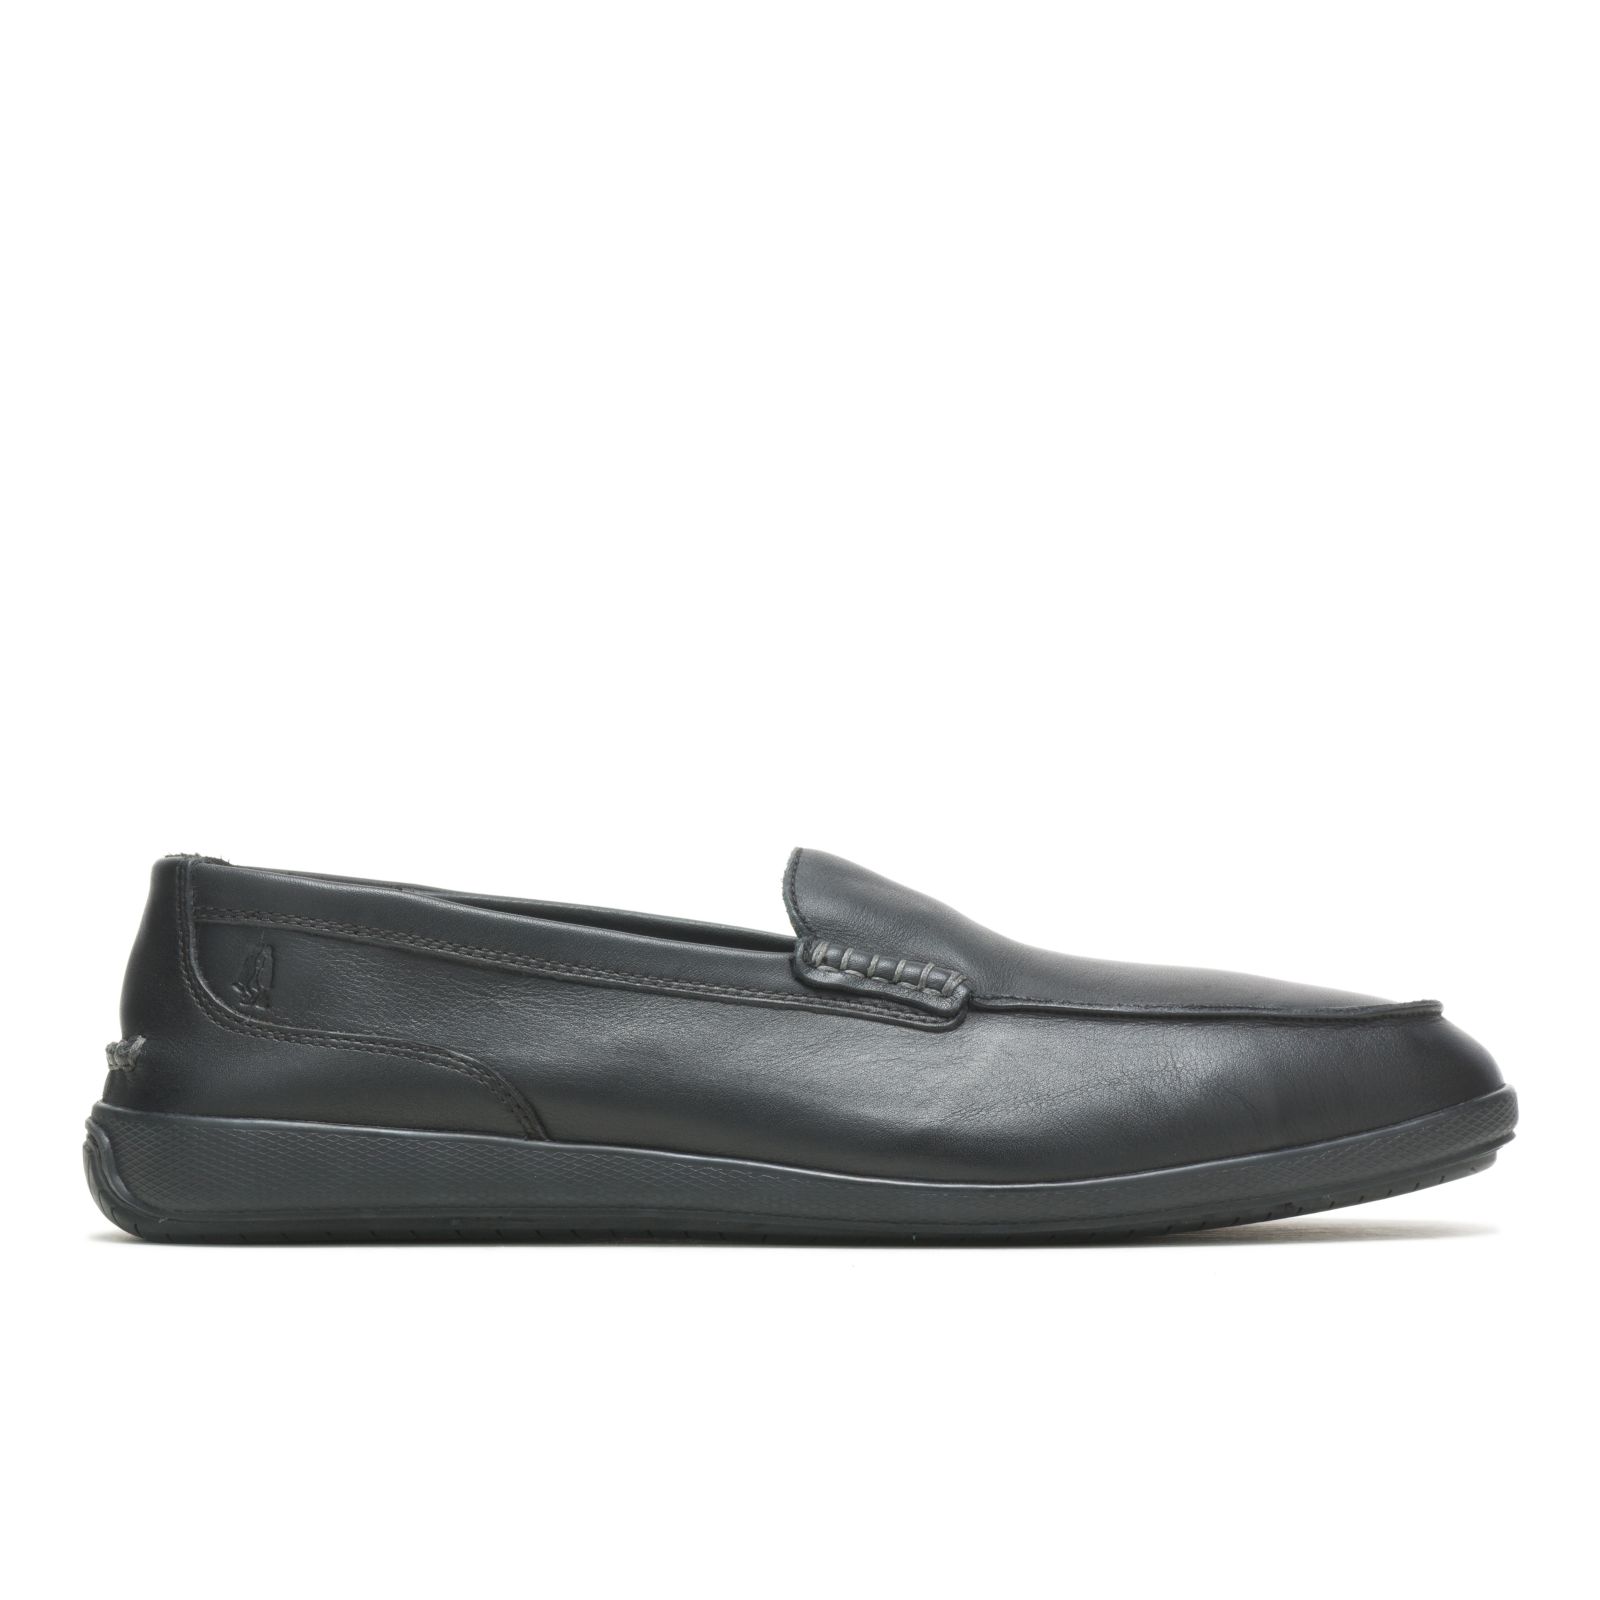 Loafers Hush Puppies Finley Hombre Negros | GMIUCSB-46